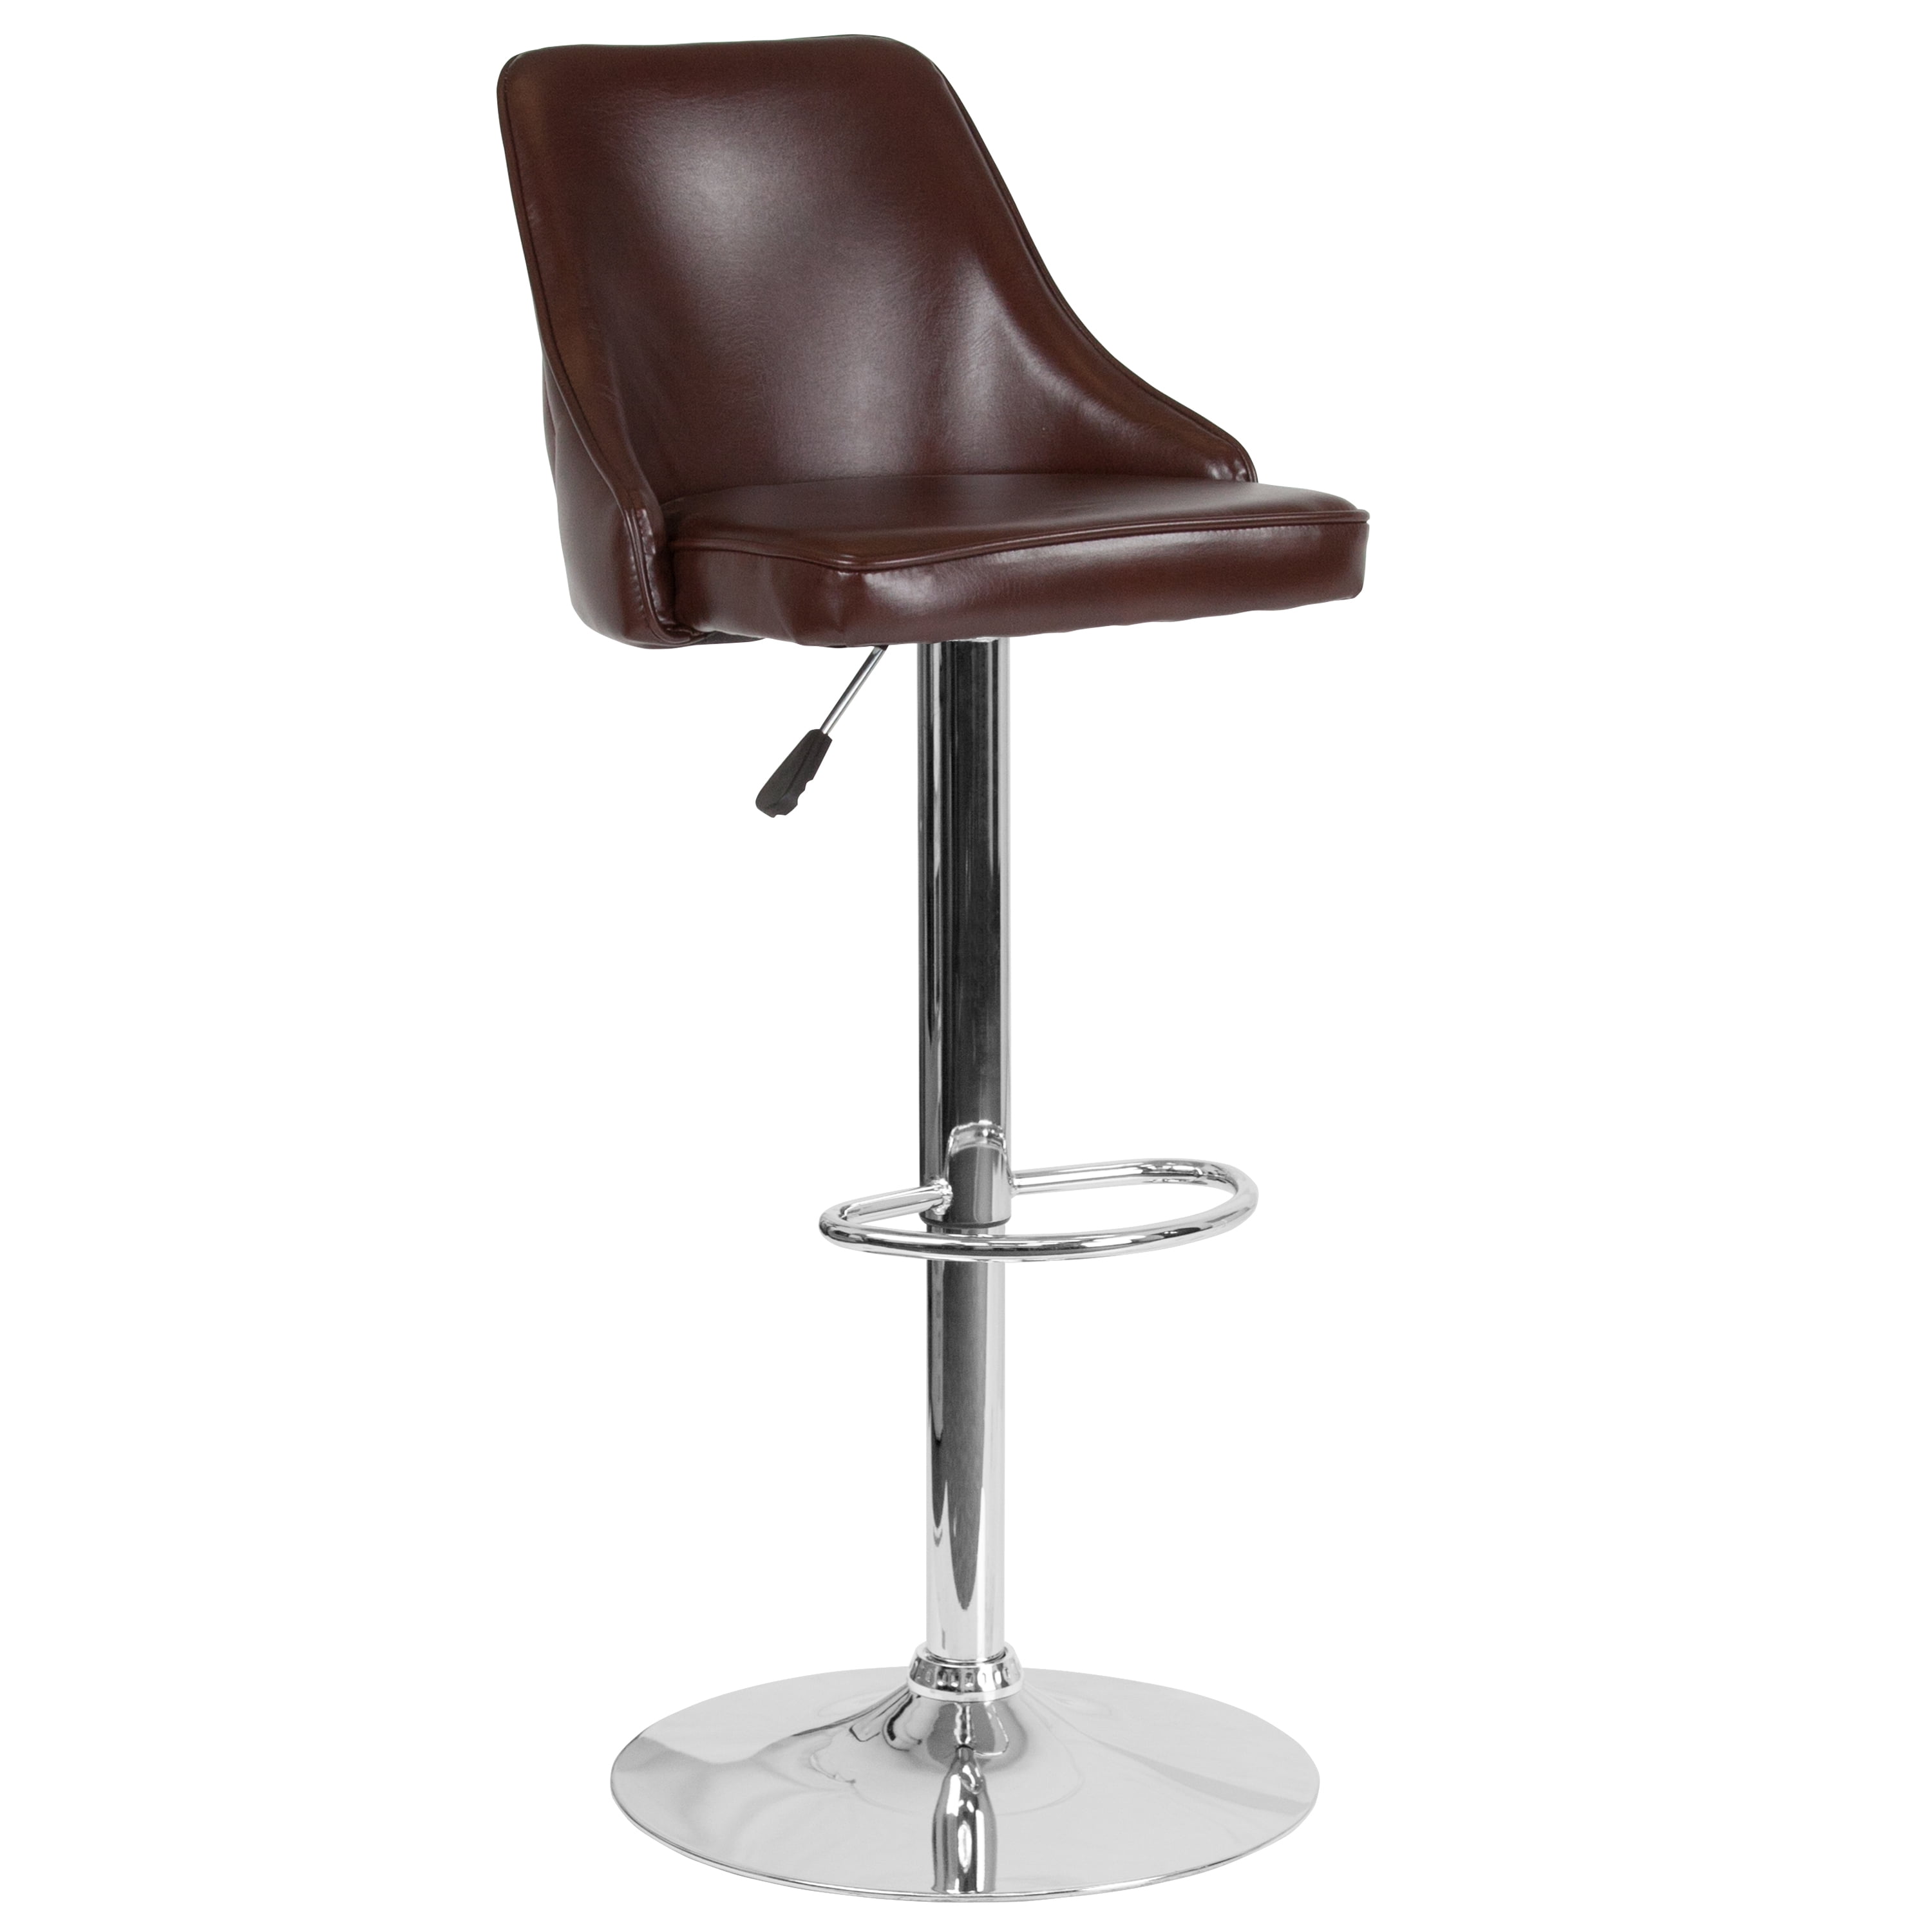 Photo 1 of Flash Furniture Trieste Contemporary Adjustable Height Barstool in Brown LeatherSoft